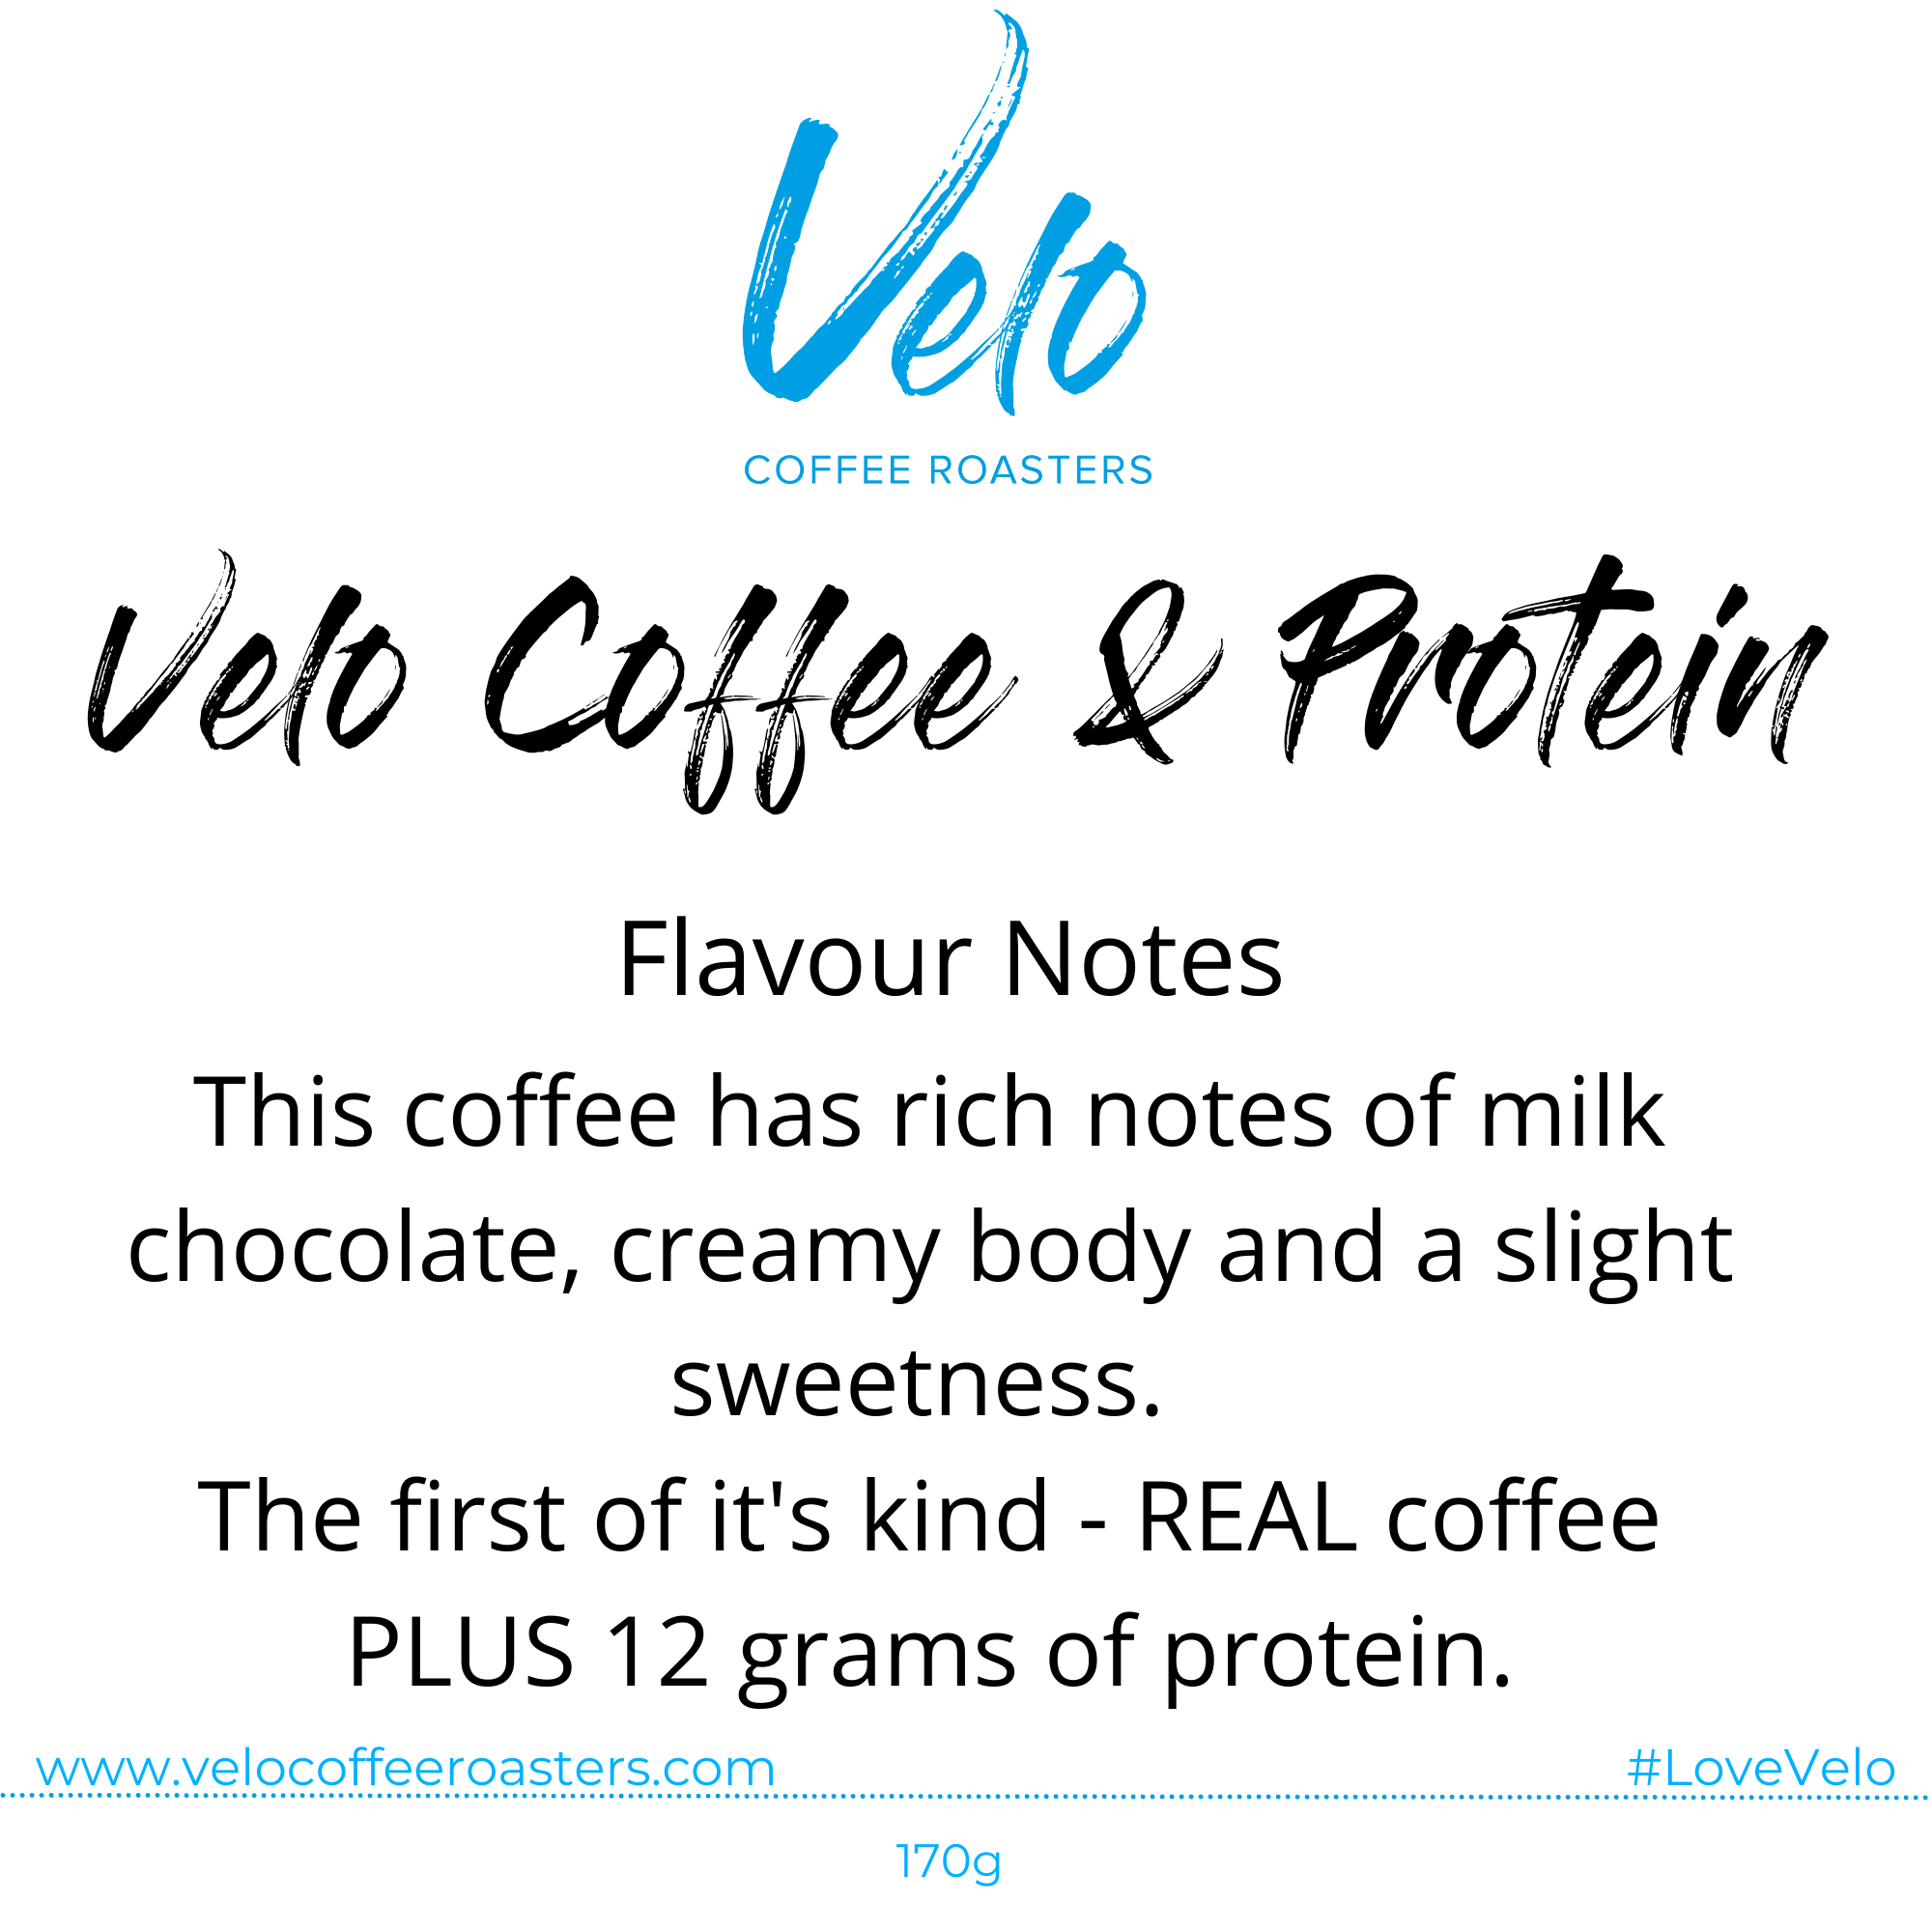 Velo Coffee + Protein - Real Coffee plus 12 Grams of Protein